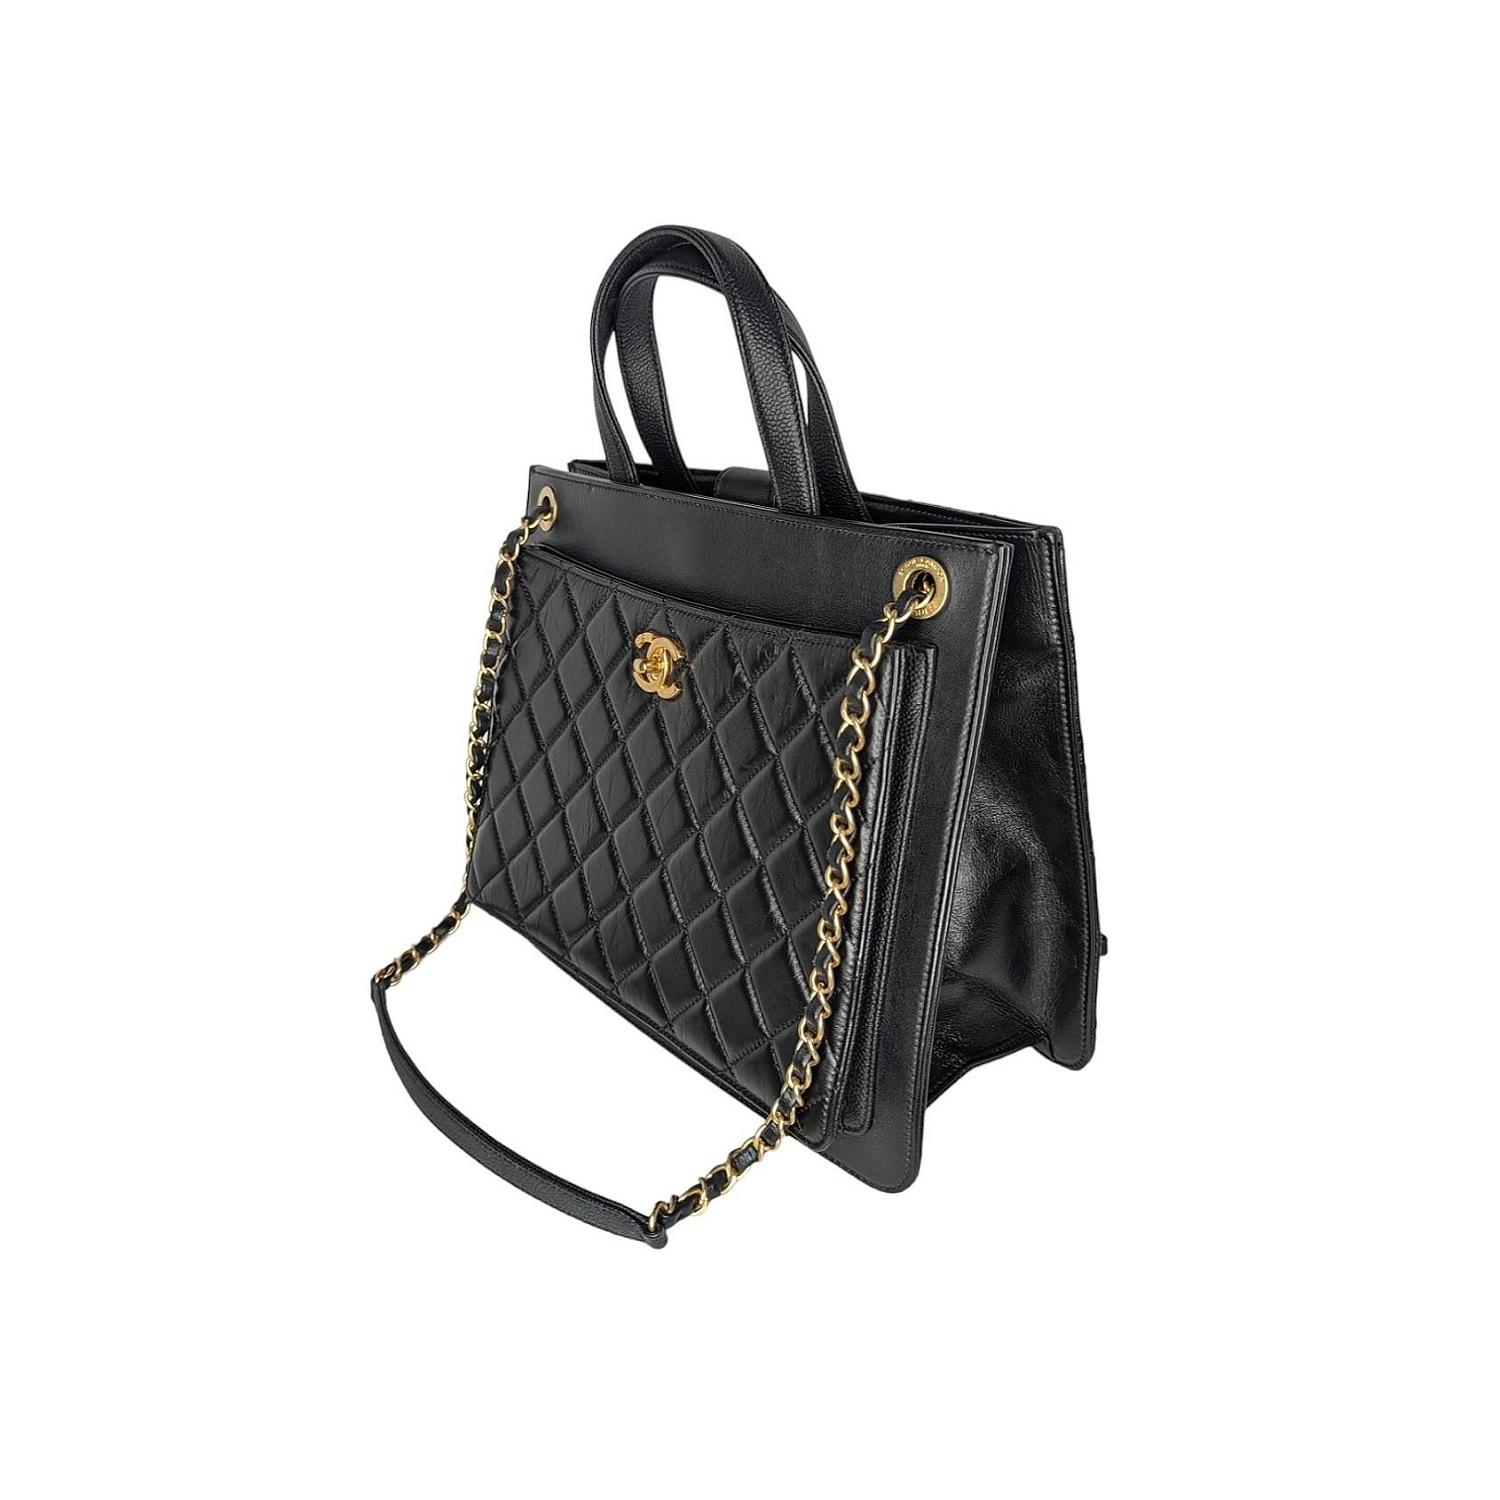 his stunning shoulder bag is crafted of smooth calfskin leather in black. The bag features aged gold chain link leather threaded shoulder straps with shoulder pads, dual flat top handles, and a frontal aged gold Chanel CC with a front quilted patch